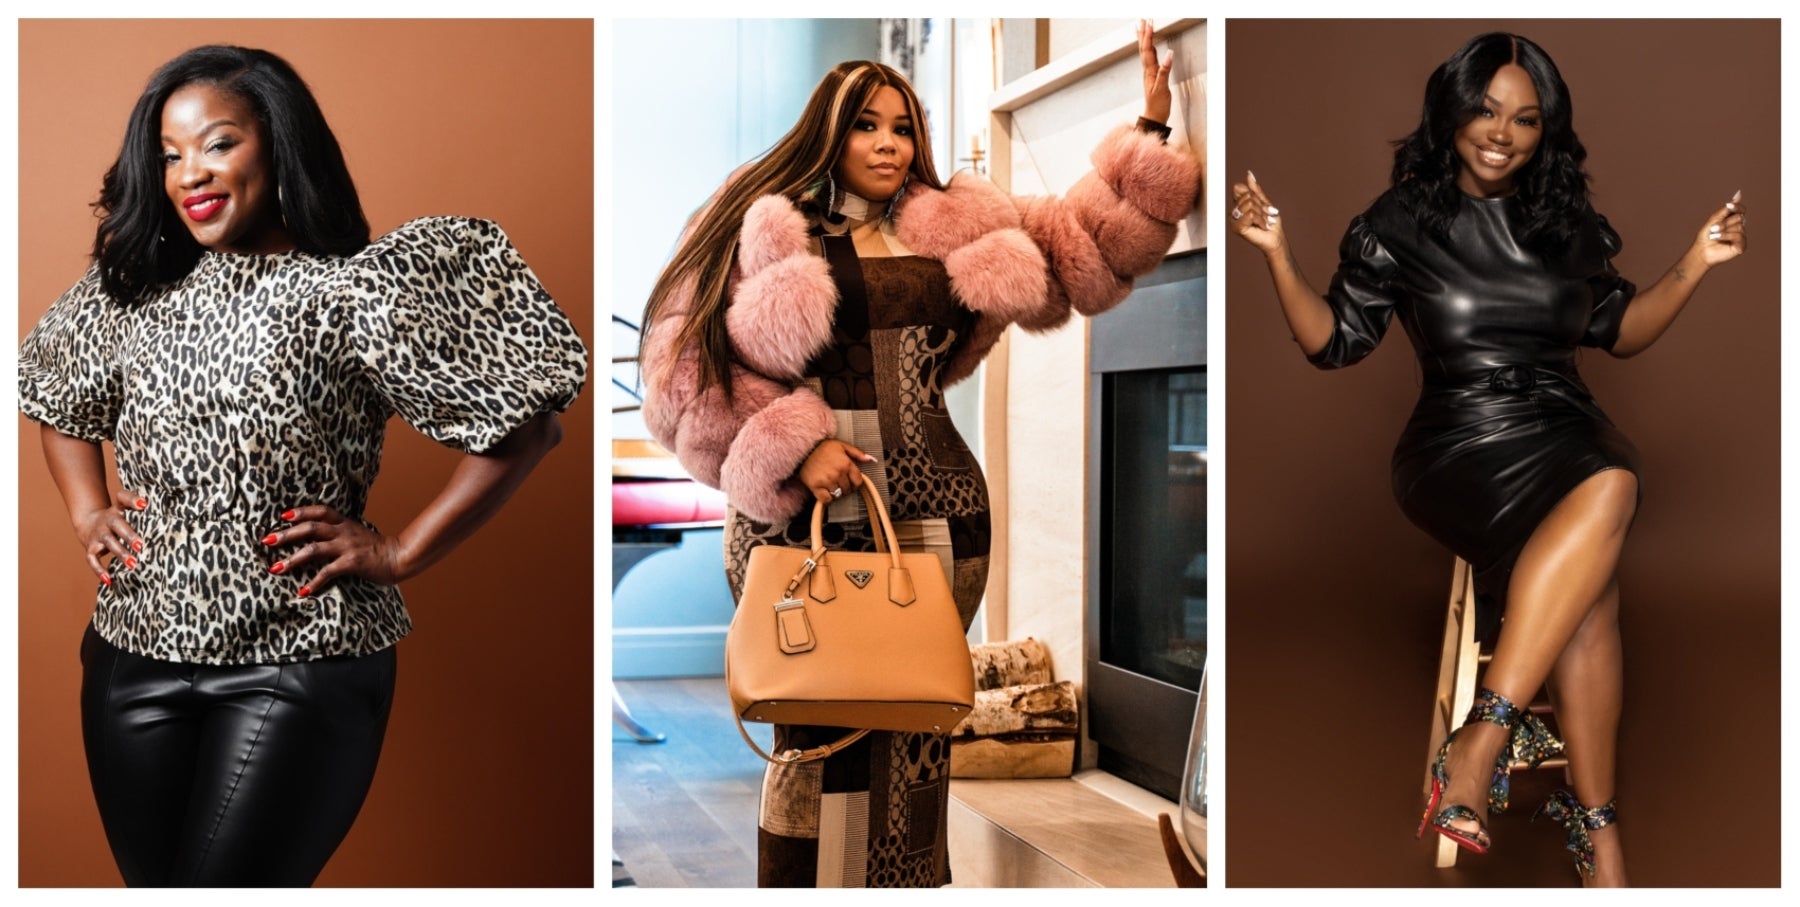 Five Black Publicists Who Started Their Own Fashion and Beauty Empires